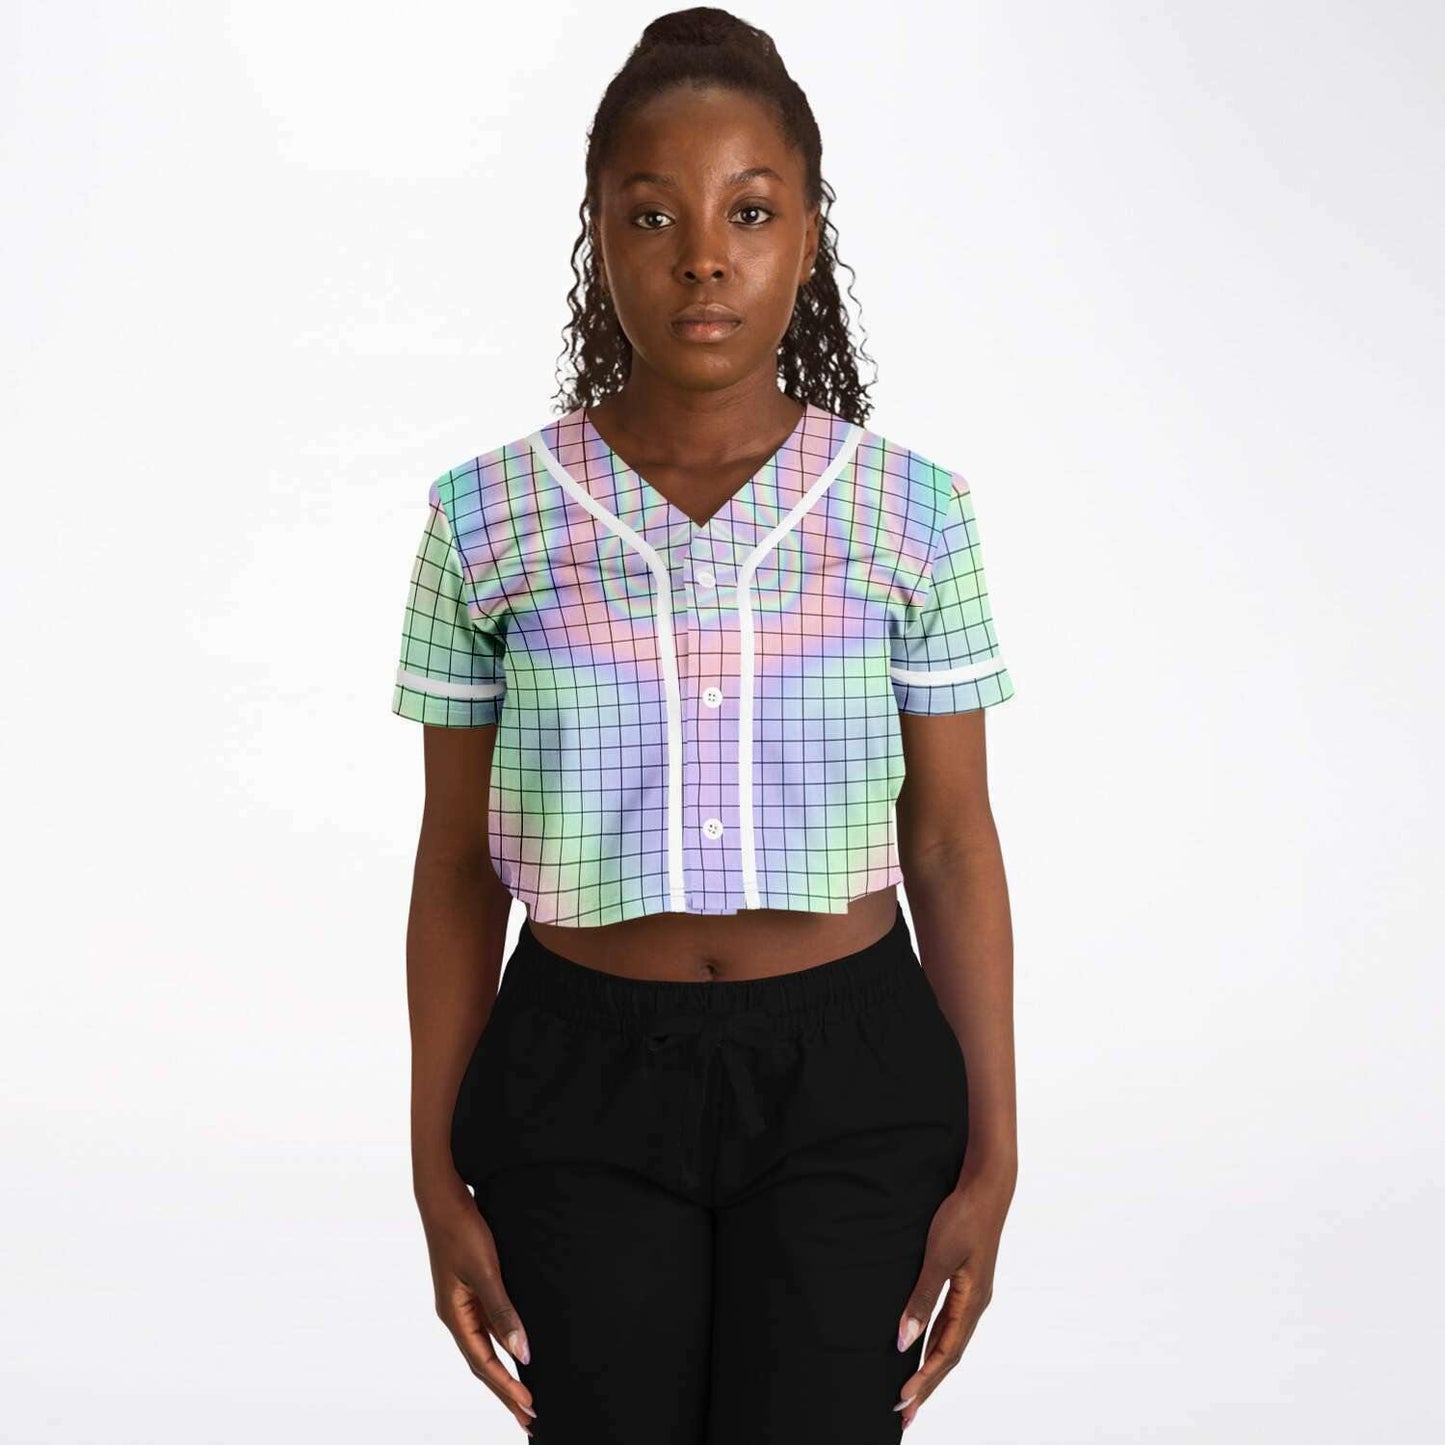  Holographic Crystal  Rave Cropped Baseball Jersey, [music festival clothing], [only clout], [onlyclout]